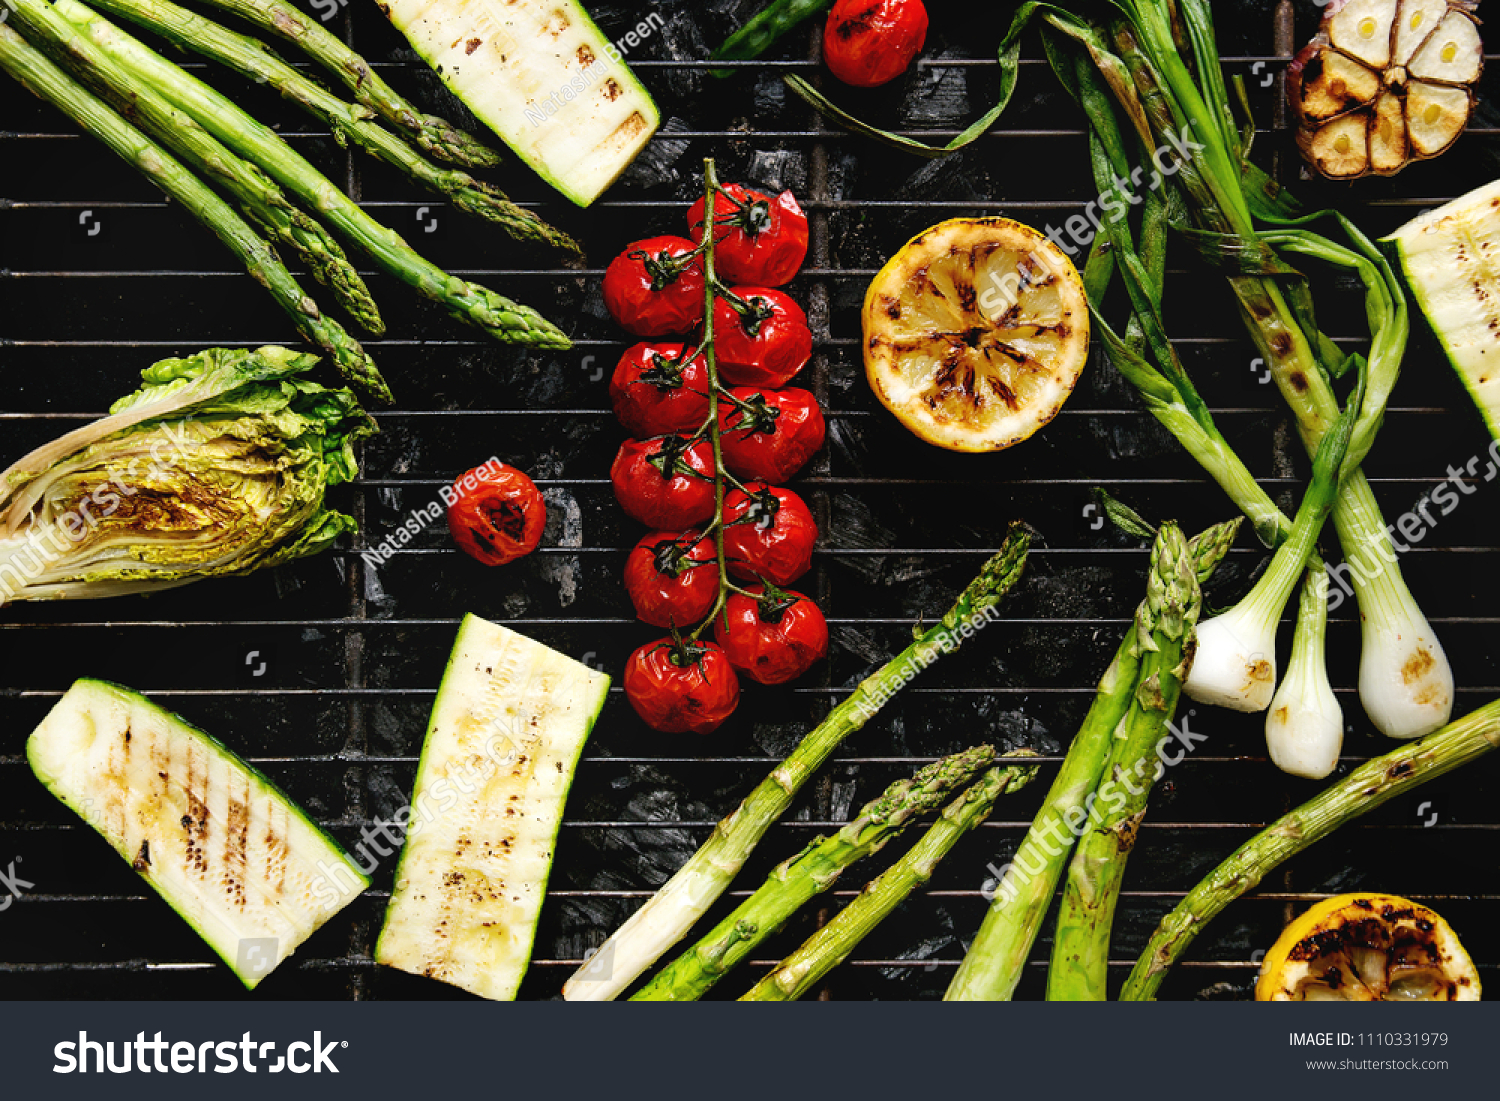 Grilled vegetables green asparagus, garlic, lemon, spring onion, zucchini, cherry tomatoes, salad on bbq grill rack over charcoal. Top view. Barbecue concept #1110331979